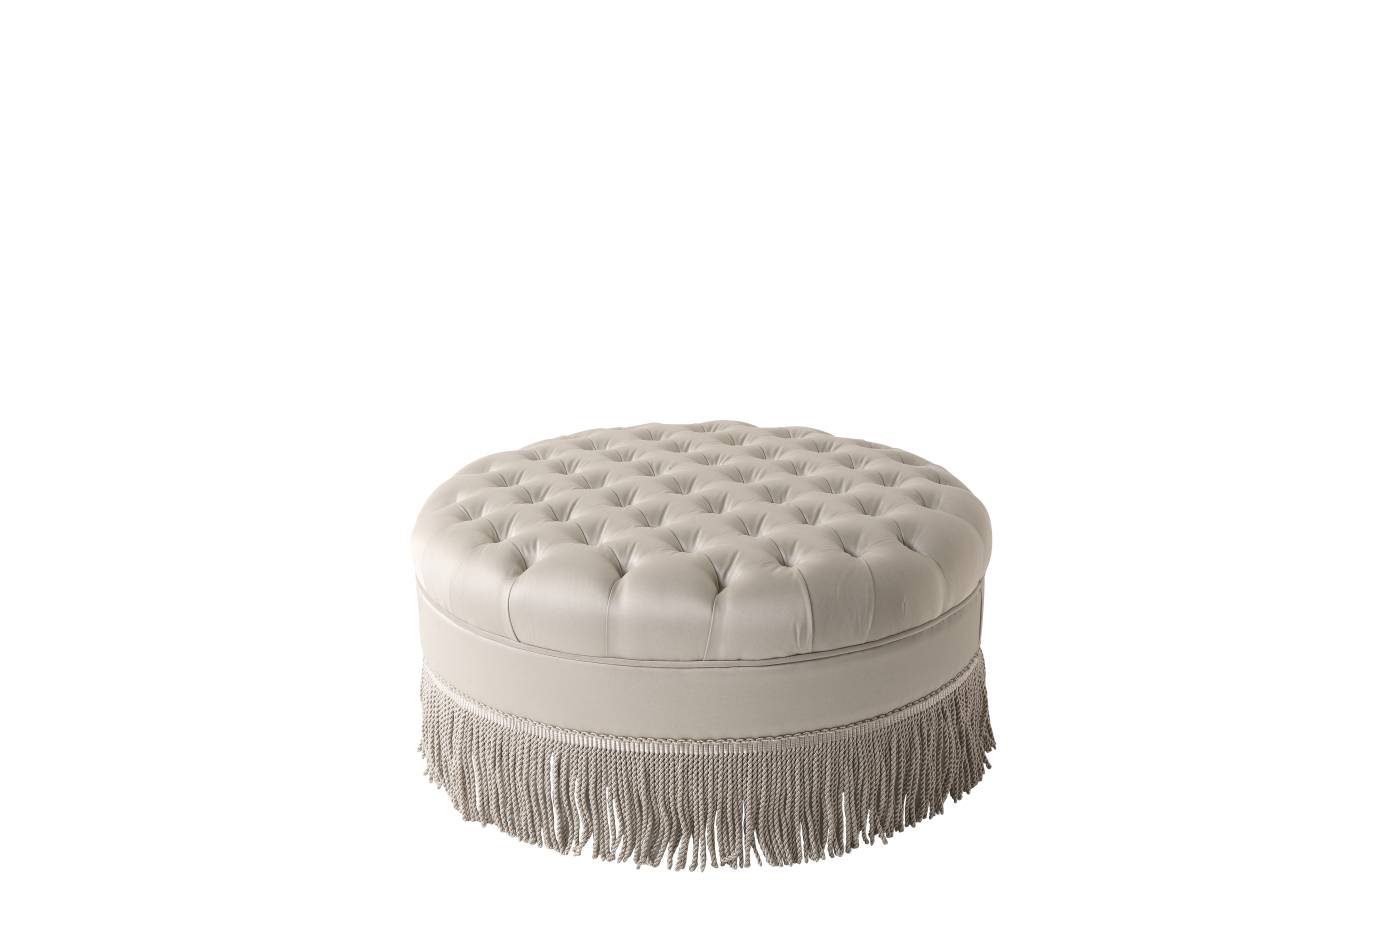 PLEASURE pouf – Transform your space with luxury Made in Italy classic poufs and benches of Héritage collection.